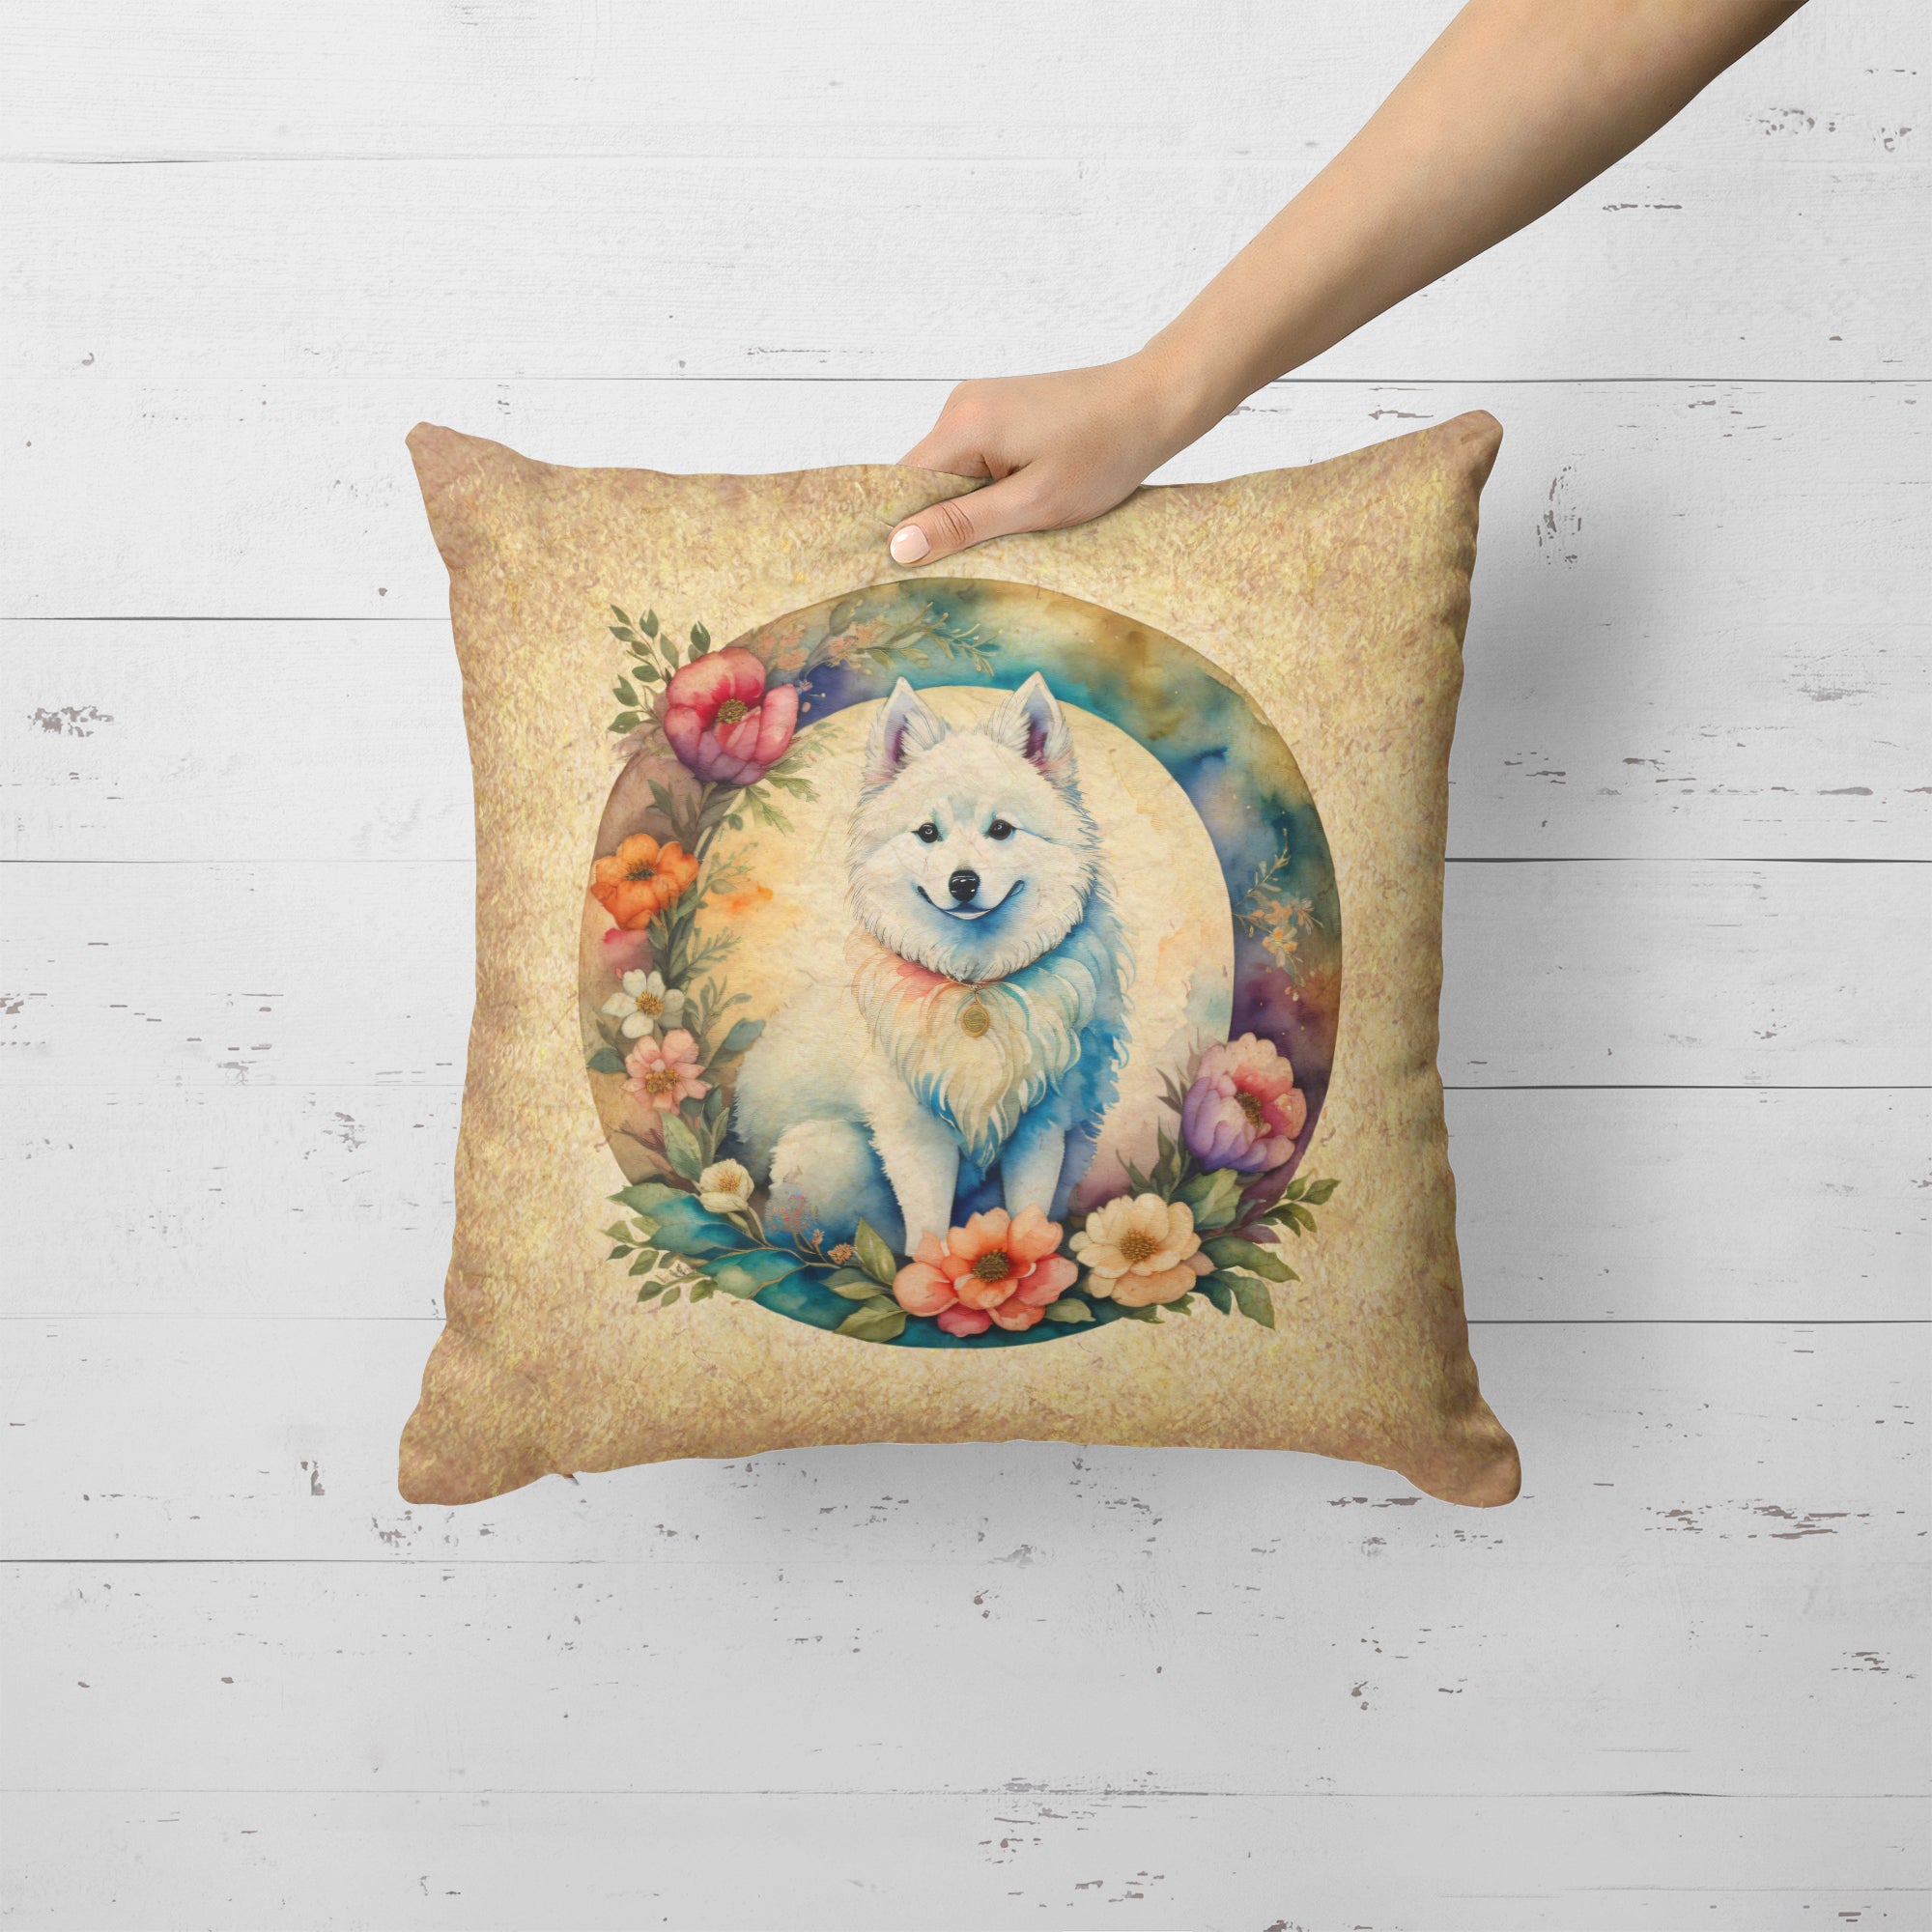 Buy this American Eskimo and Flowers Fabric Decorative Pillow